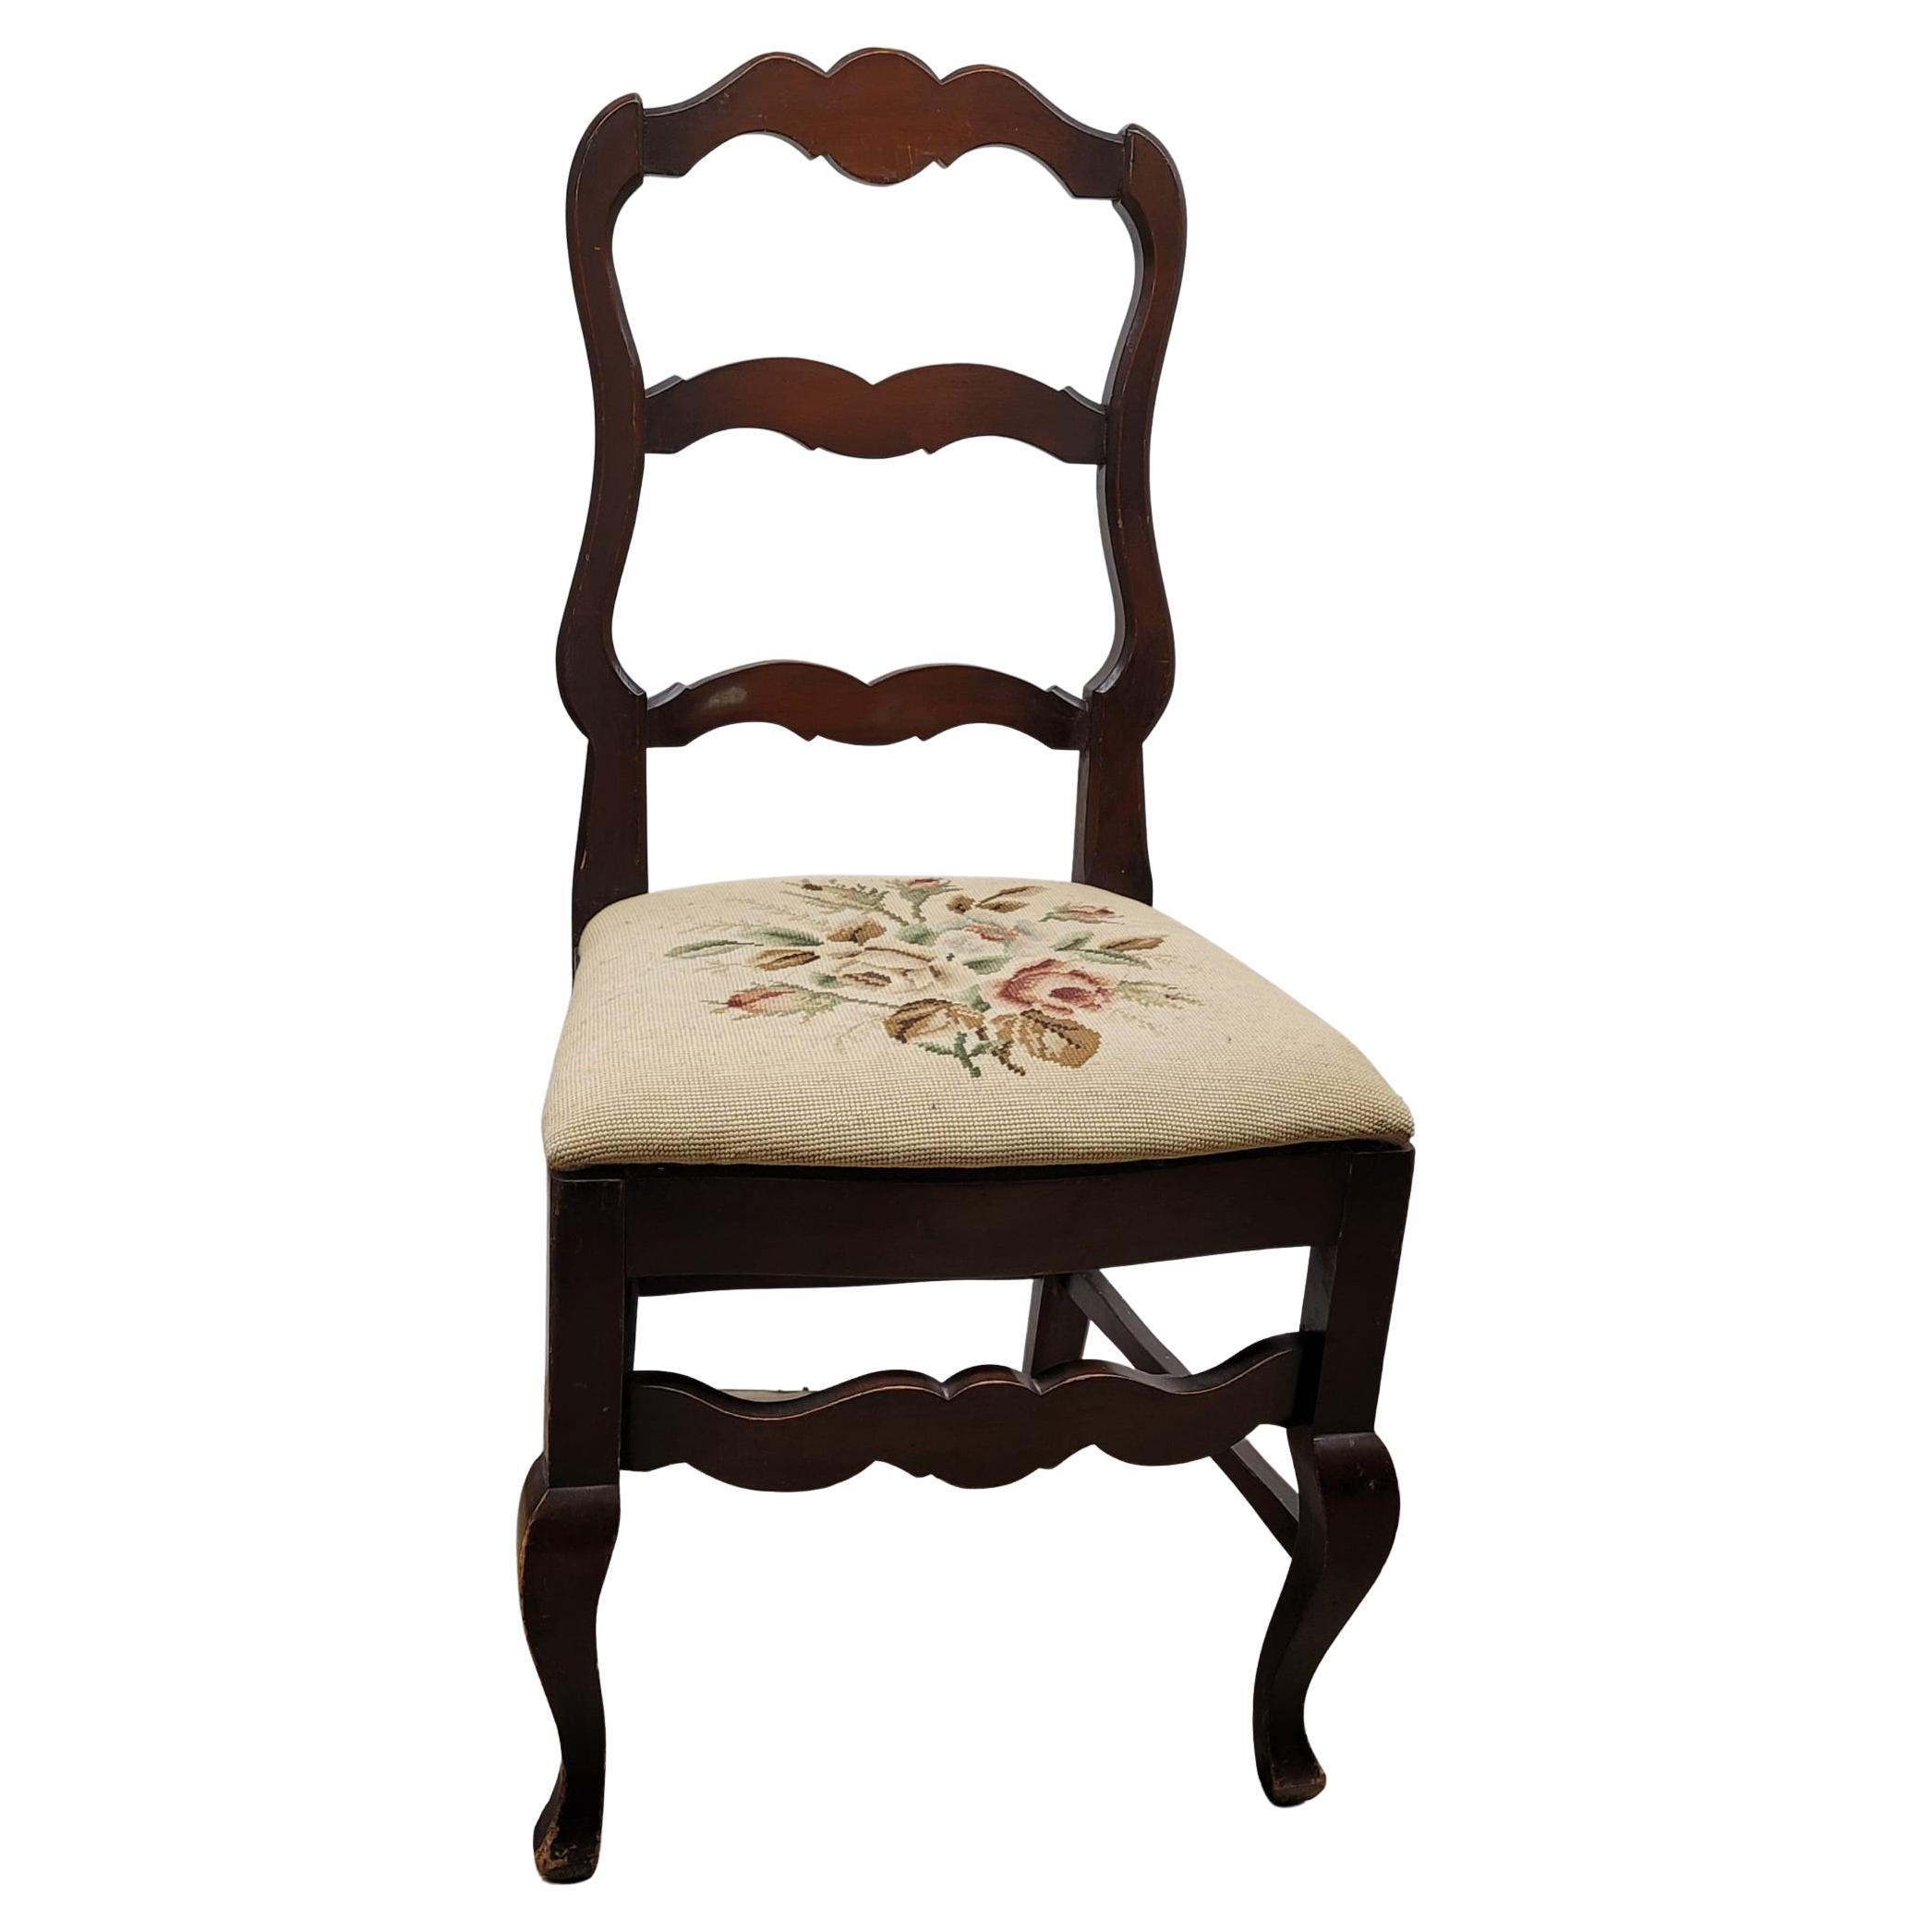 Reischman Furniture Ladder Back Mahogany Needlepoint Upholstered Chair In Good Condition For Sale In Germantown, MD